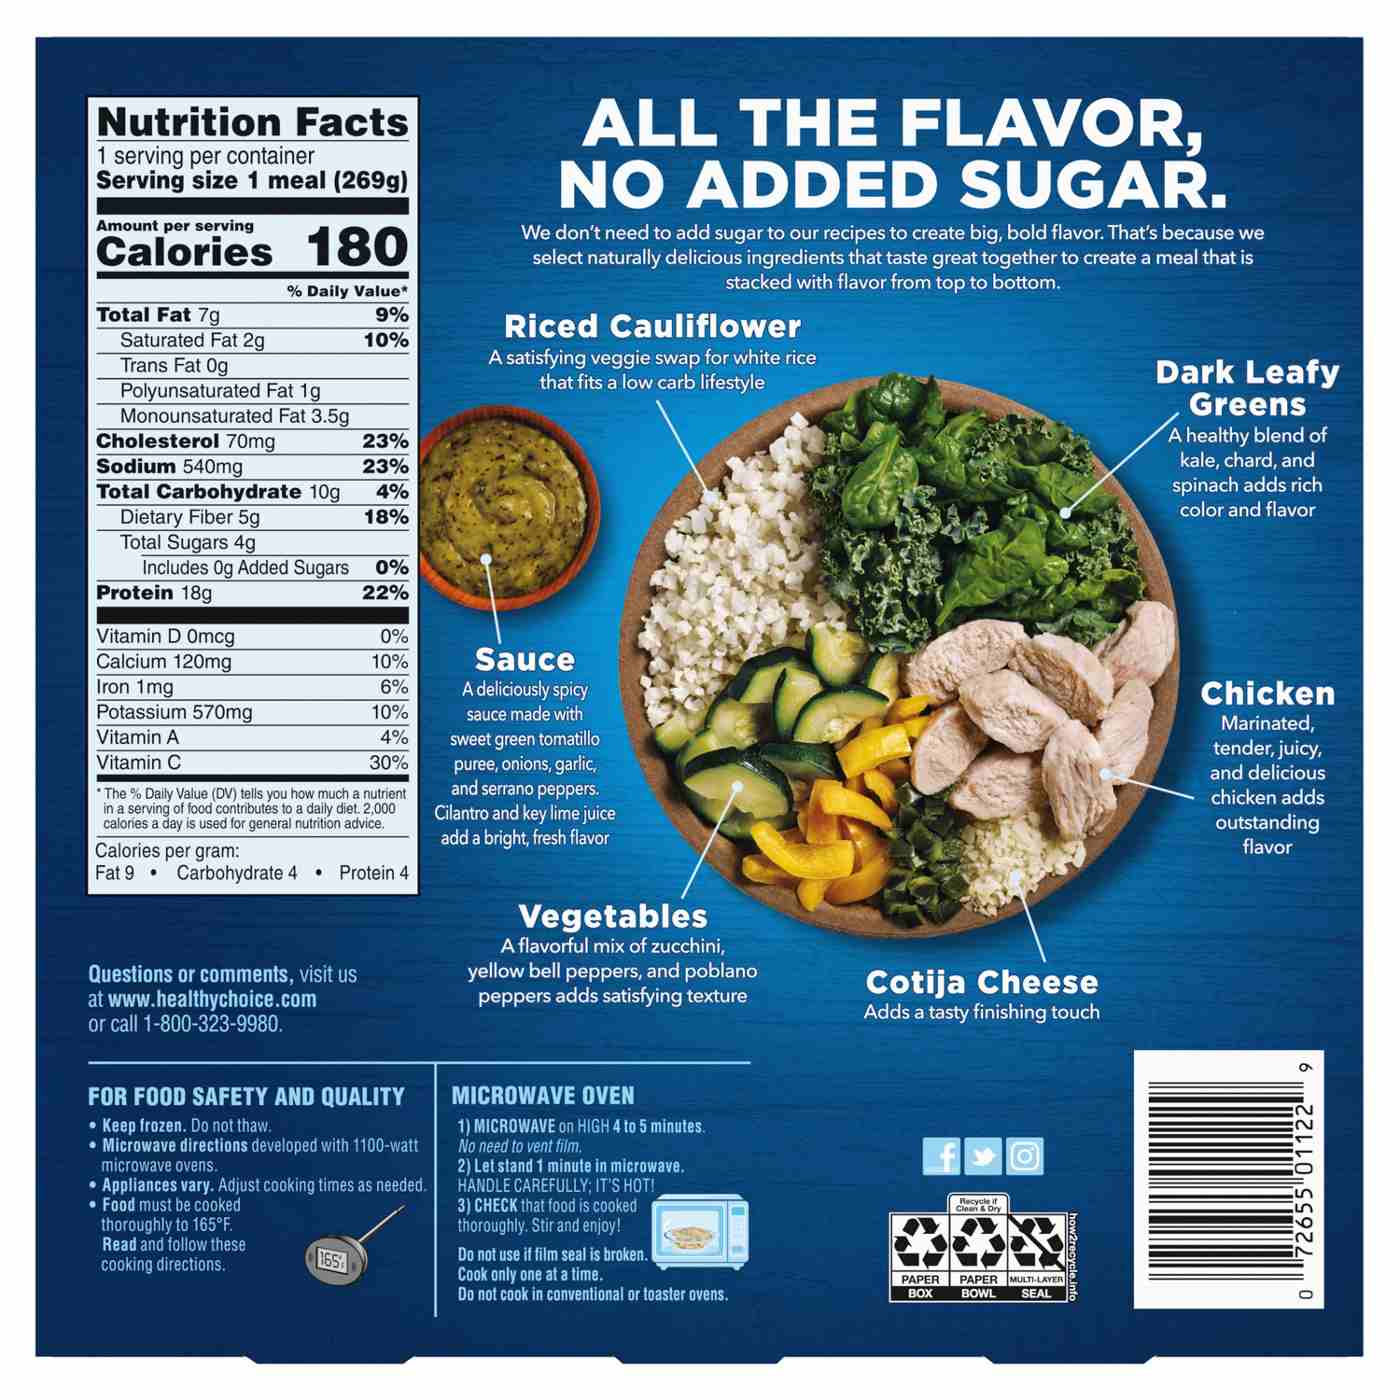 Healthy Choice Zero Low Carb Lifestyle Verde Chicken Frozen Meal; image 3 of 7